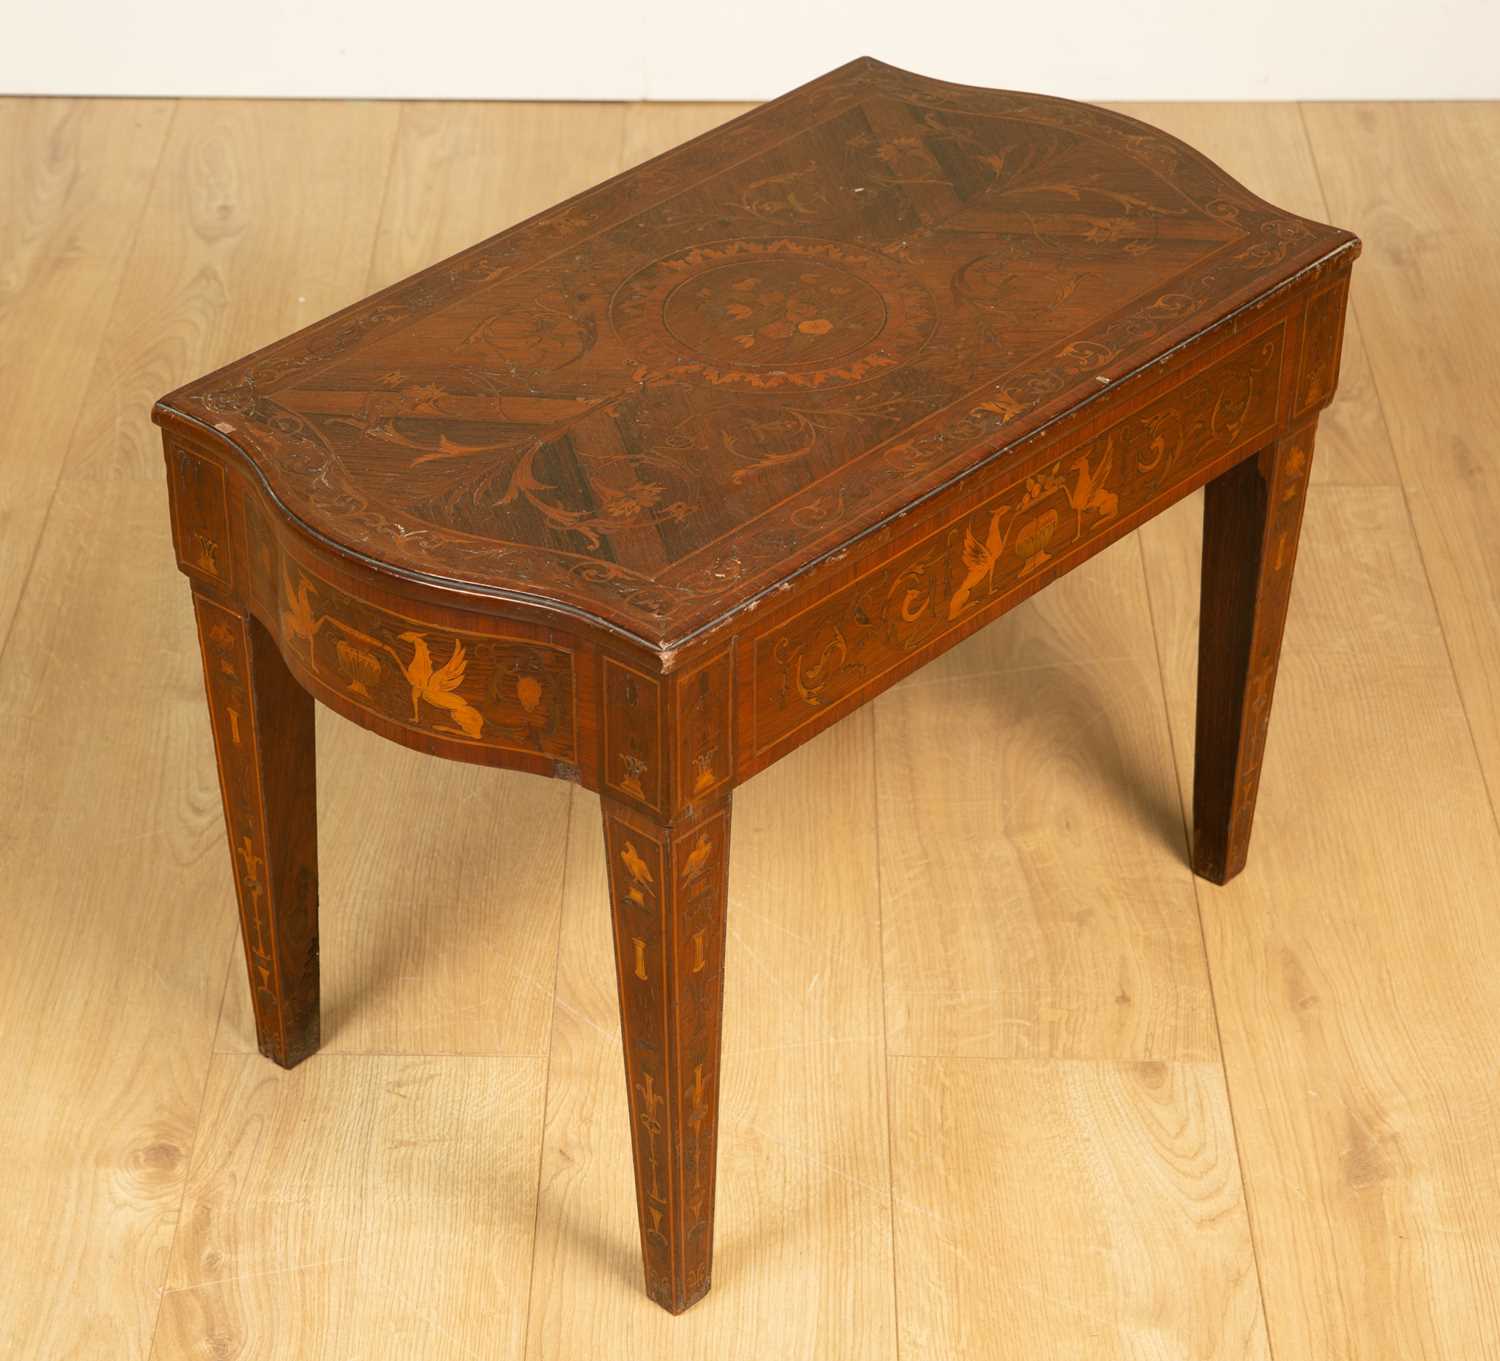 A 19th century continental rosewood and decoratively inlaid bidet stool with floral inlay to the